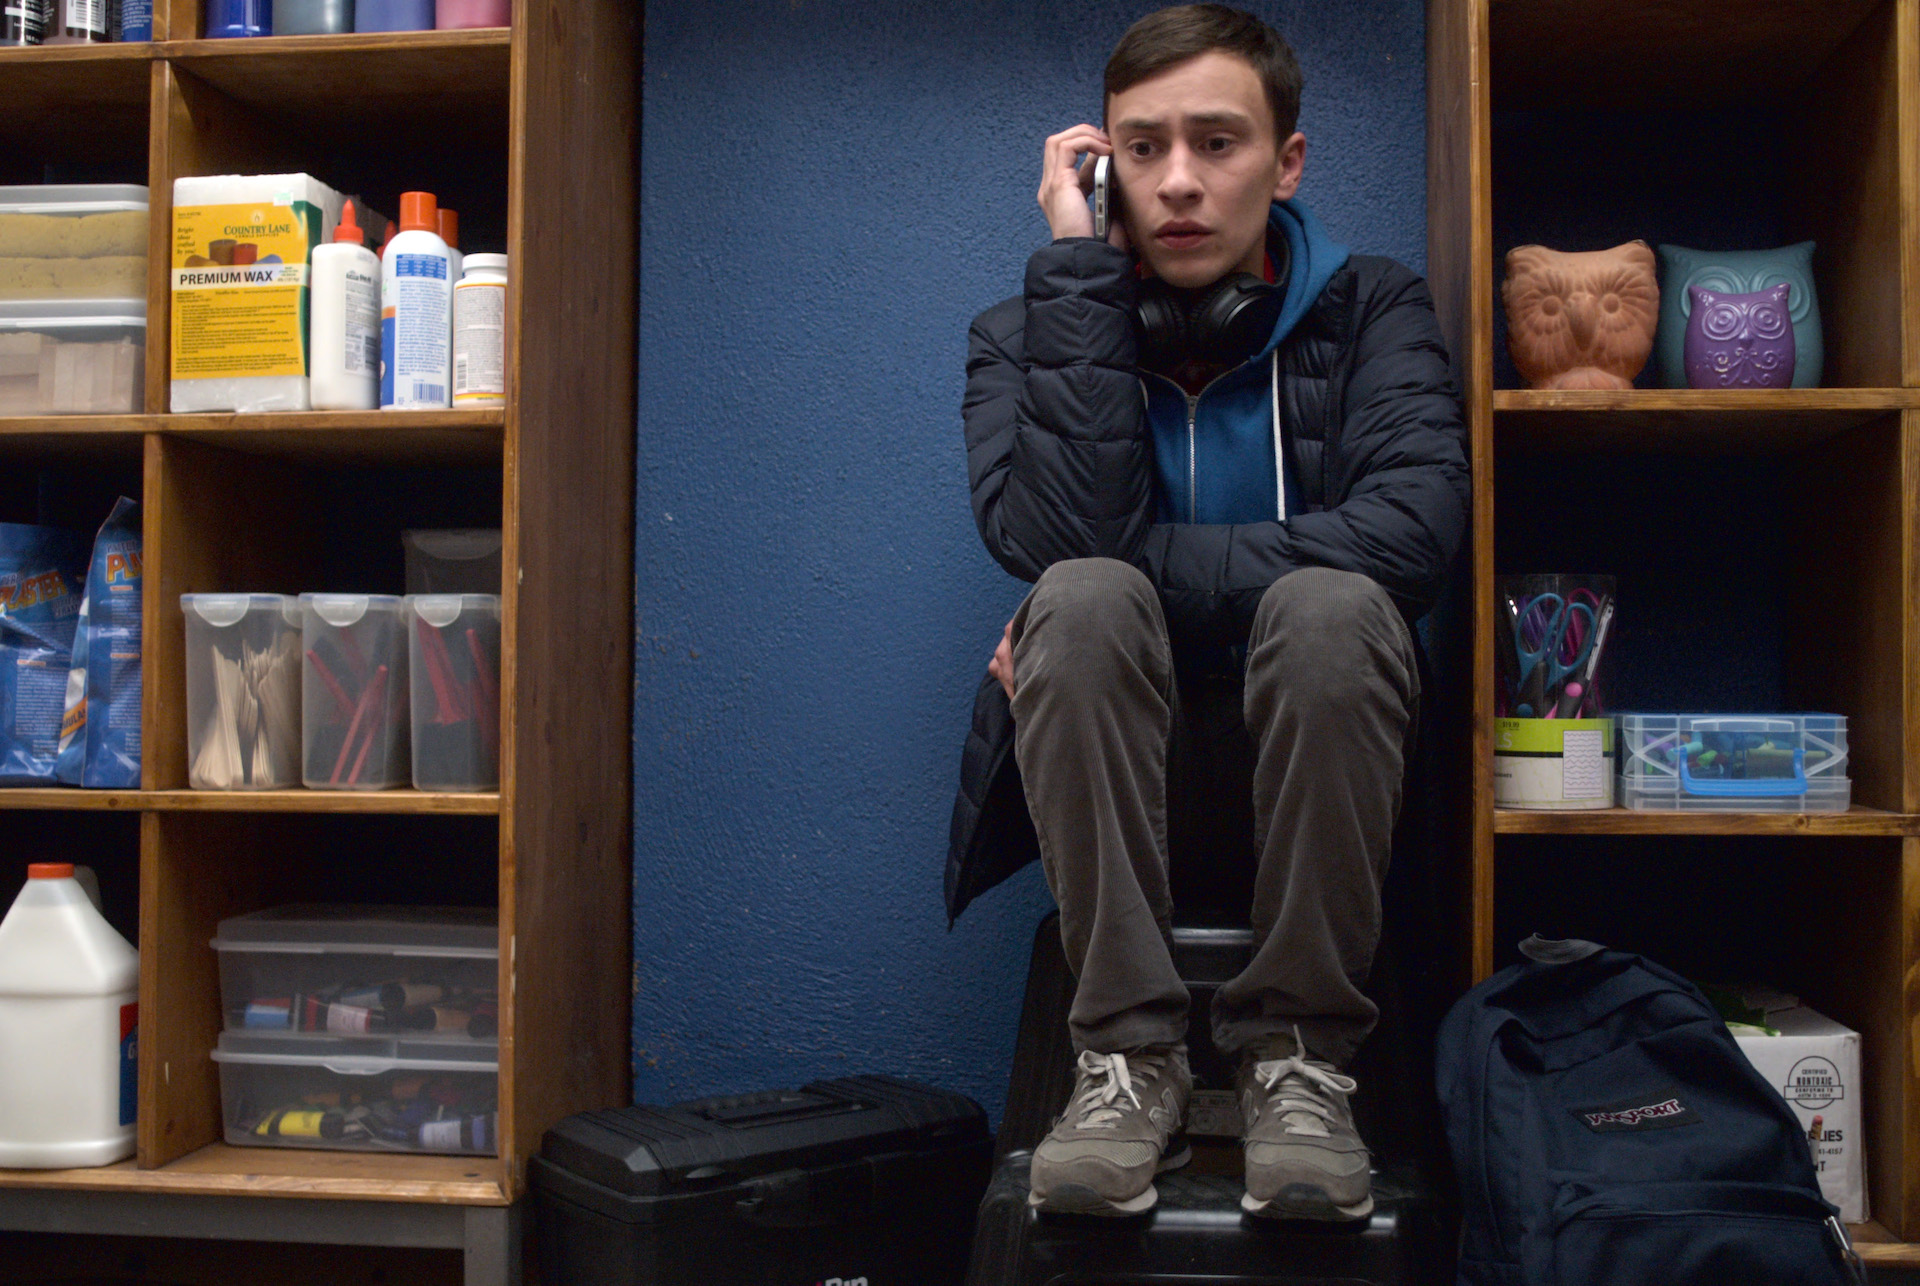 Sam Gardner (Keir Gilchrist) crouches between two shelving units on his phone in Aypical still - teen shows on Netflix